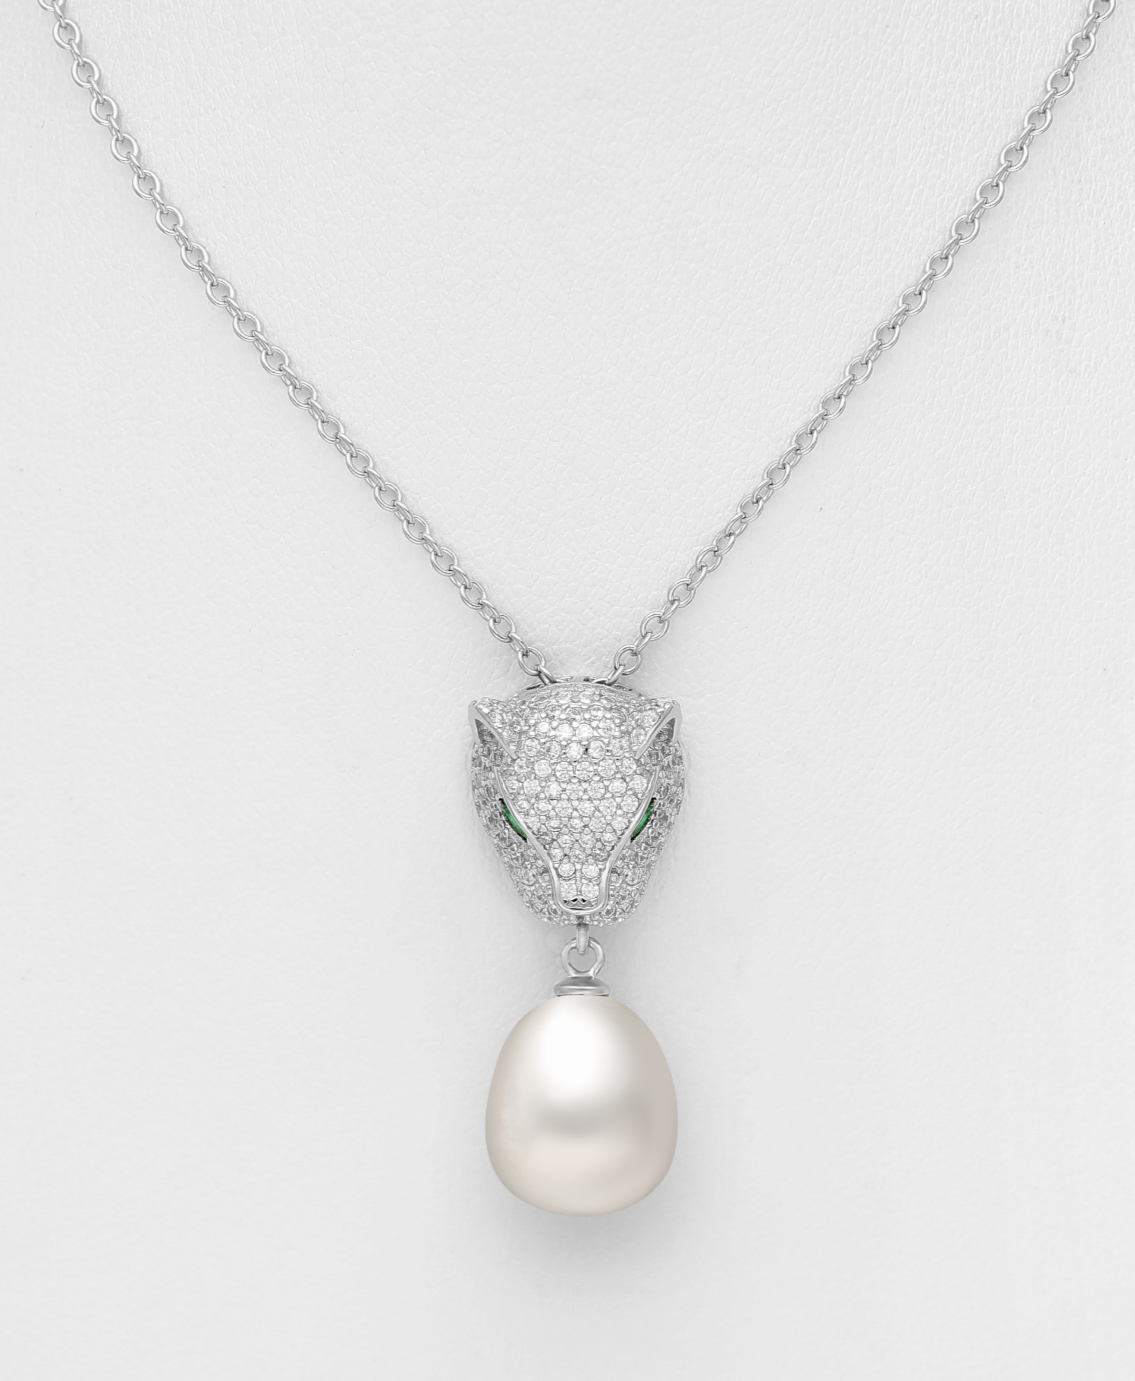 Sterling Silver Tiger Necklace, Decorated with CZ Simulated Diamonds and White FreshWater Pearl